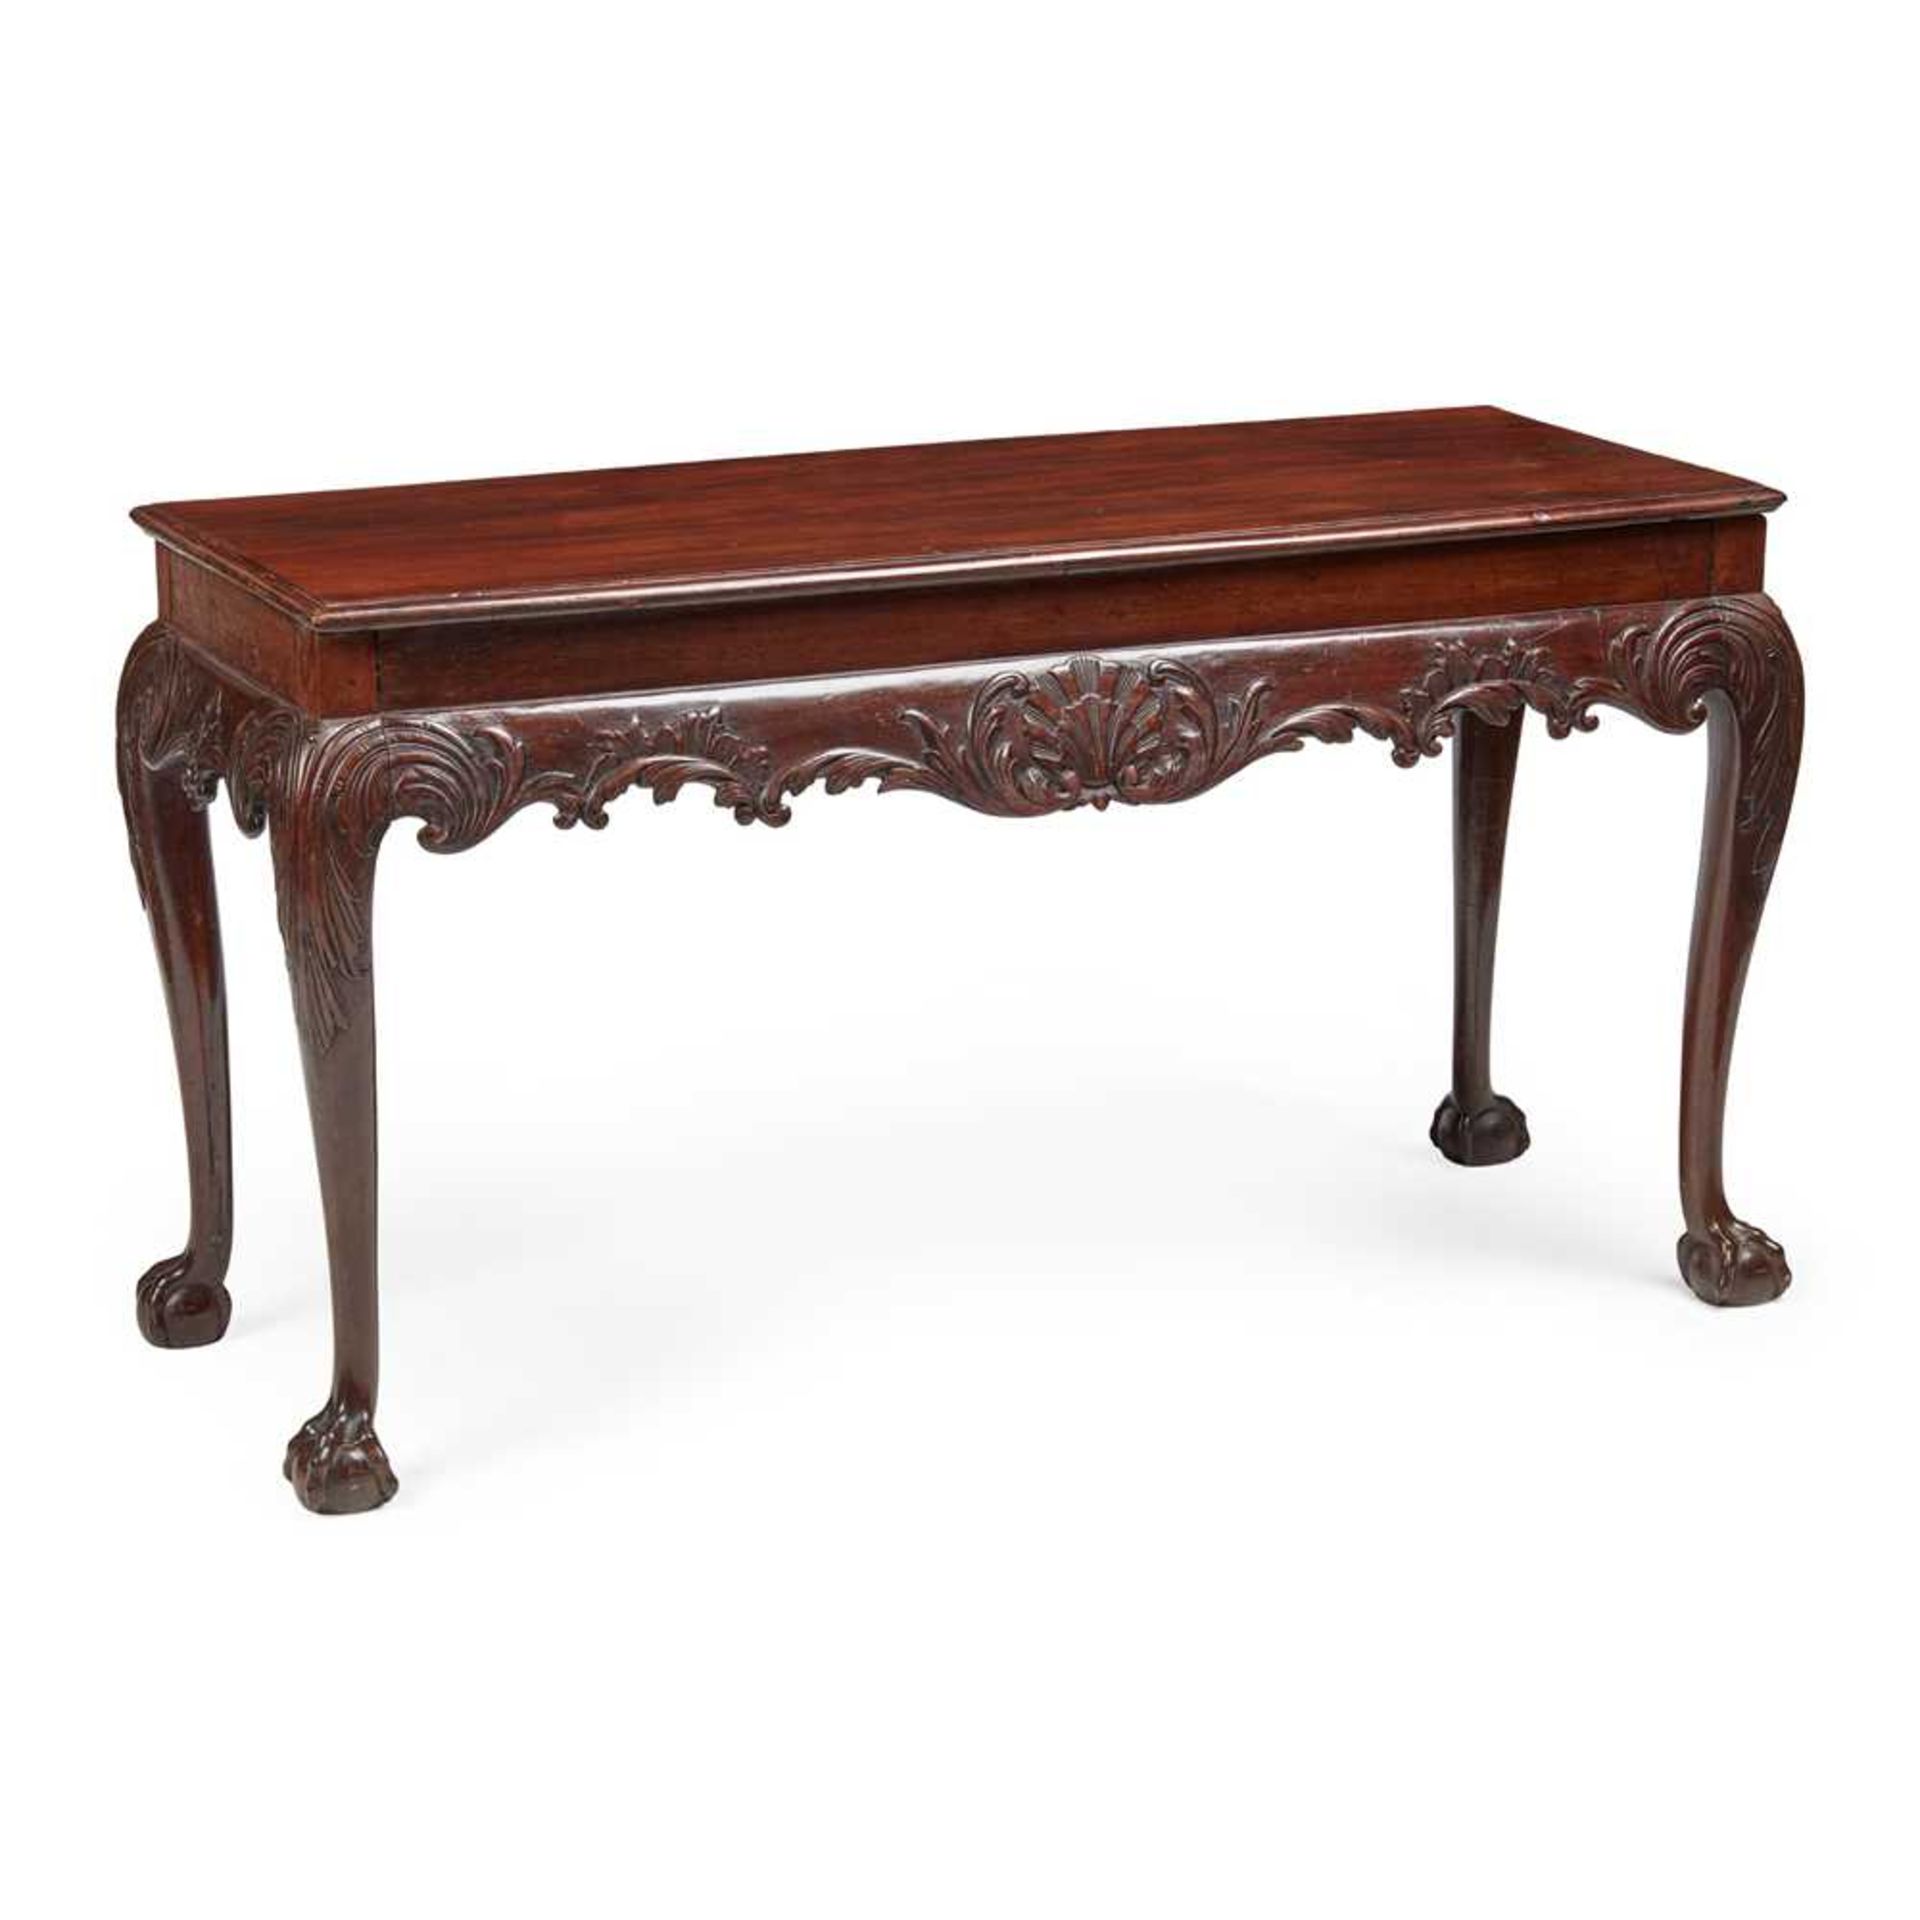 IRISH GEORGE II STYLE MAHOGANY CENTRE TABLE, IN THE MANNER OF JAMES HICKS OF DUBLIN 19TH CENTURY